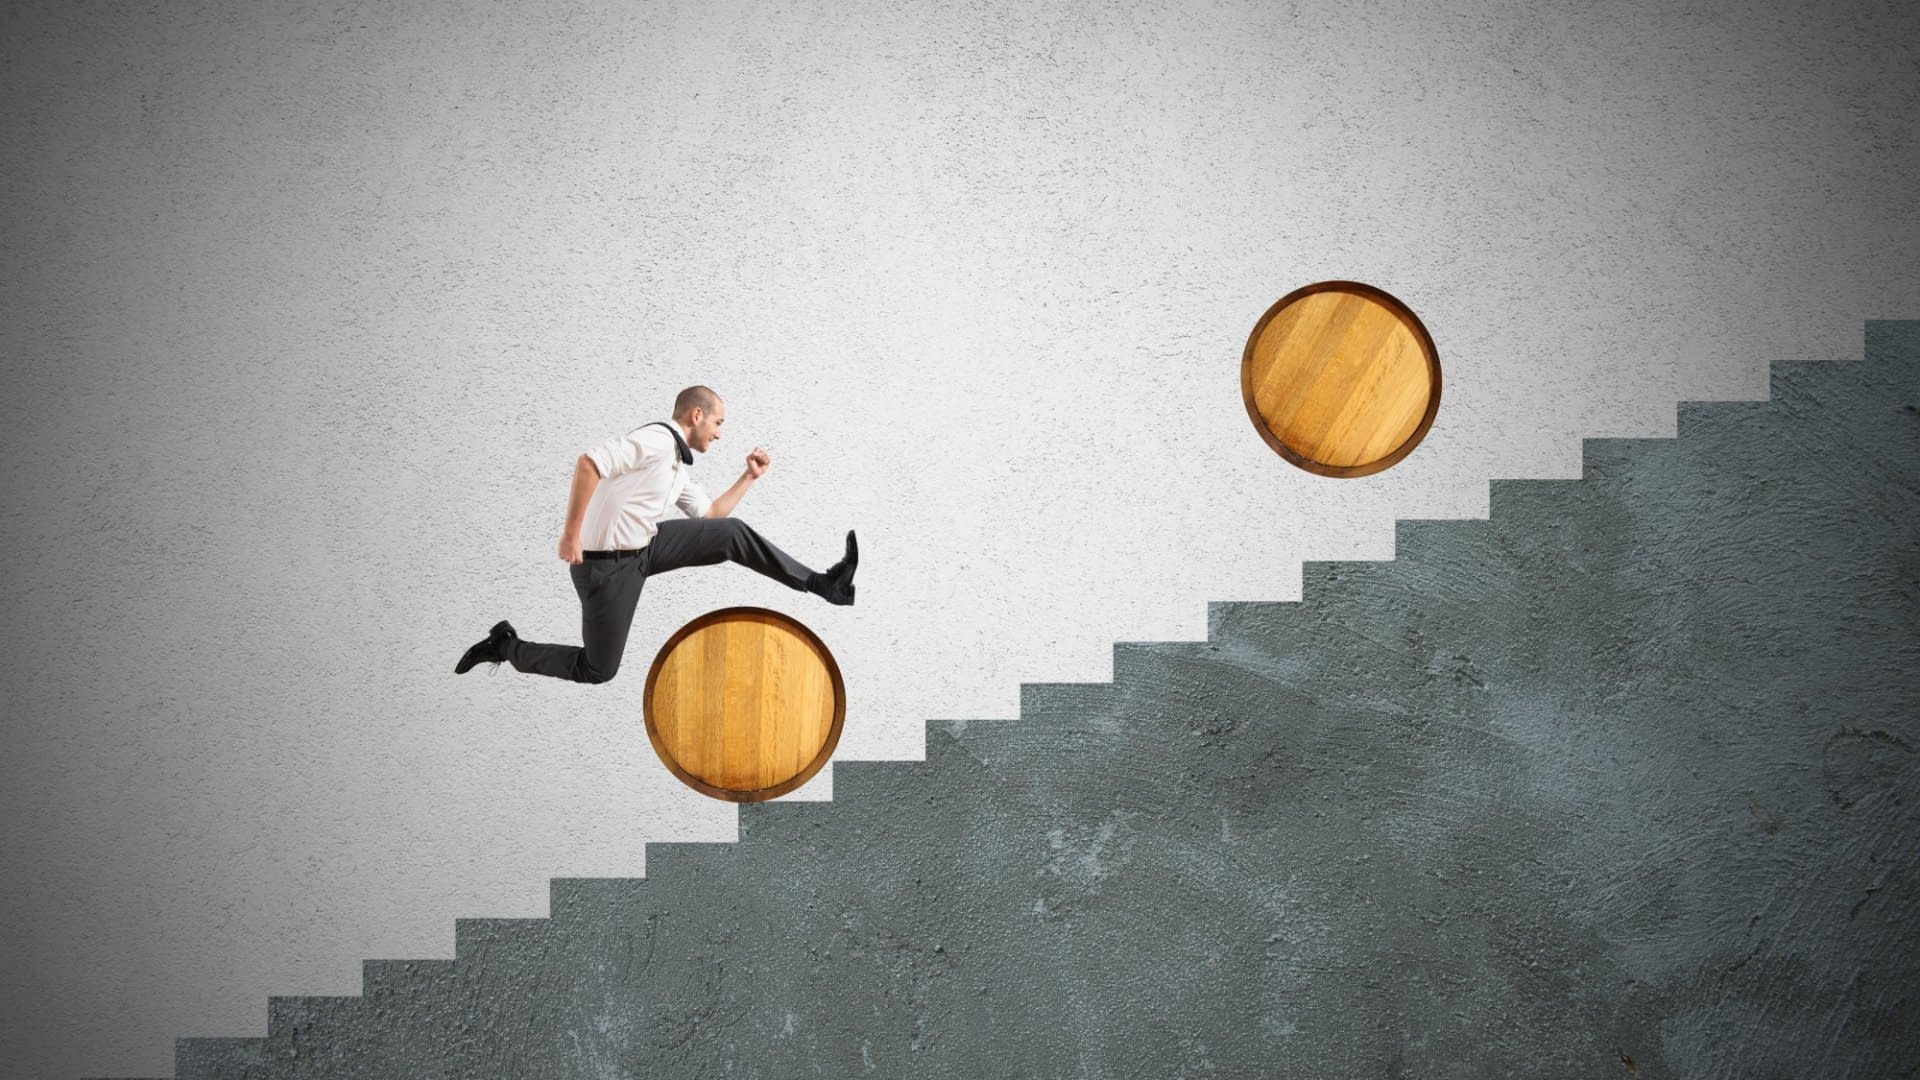 How to Overcome the 9 Most Common Obstacles That Prevent People From Living Their Dreams